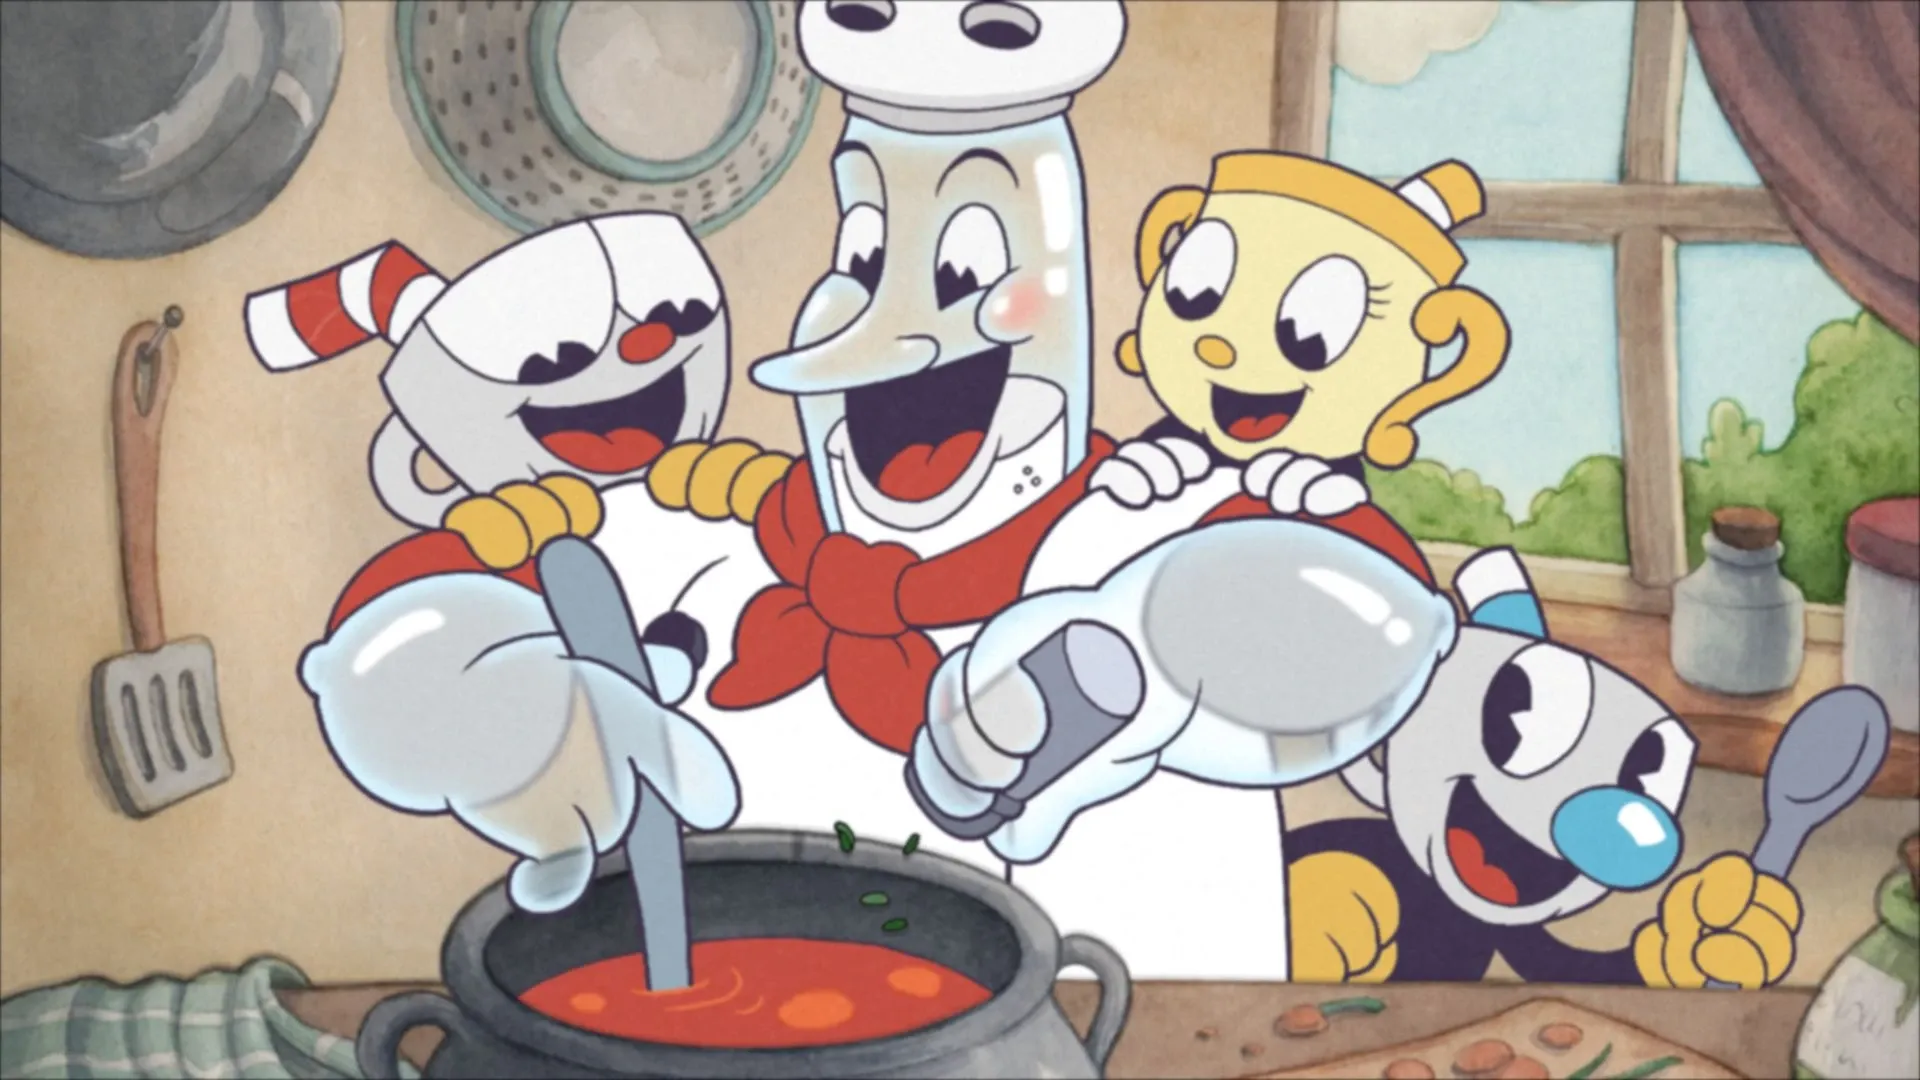 2022 golden joystick awards results: Winner of ''Best Game Expansion'', Cuphead: The Delicious Last Course